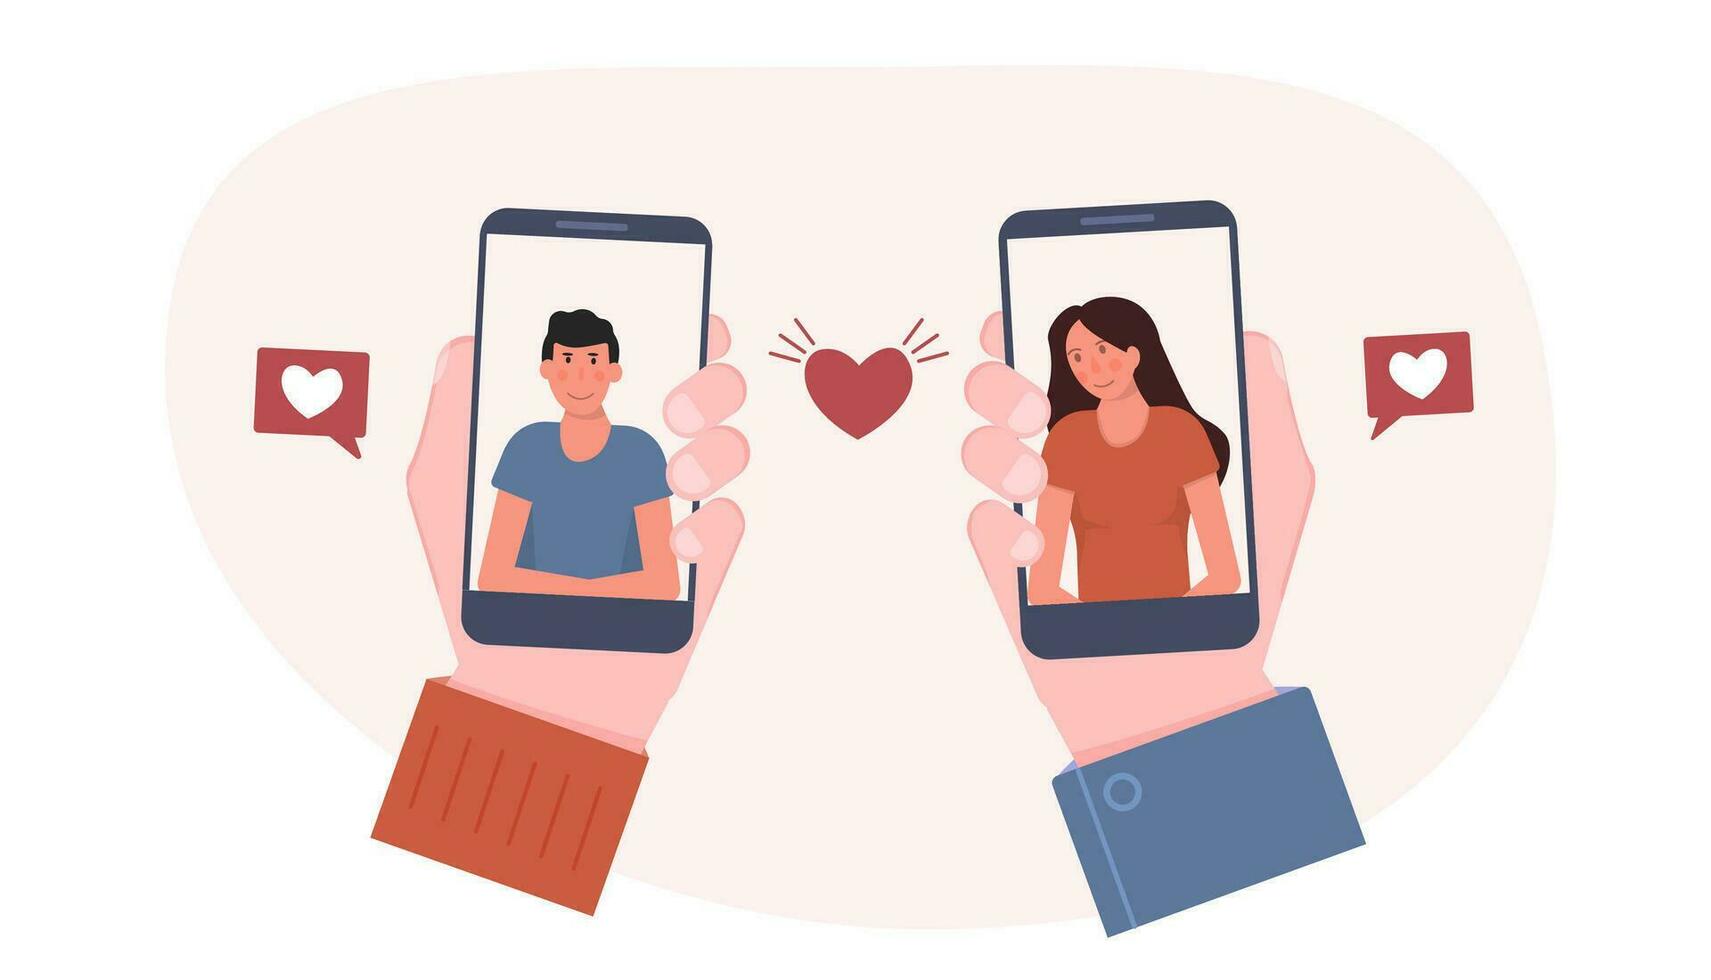 Concept of online dating app. People looking for a couple. Social media. Virtual relationship. People communications. Lovers chatting online. A hand with smartphone. Vector flat illustration.